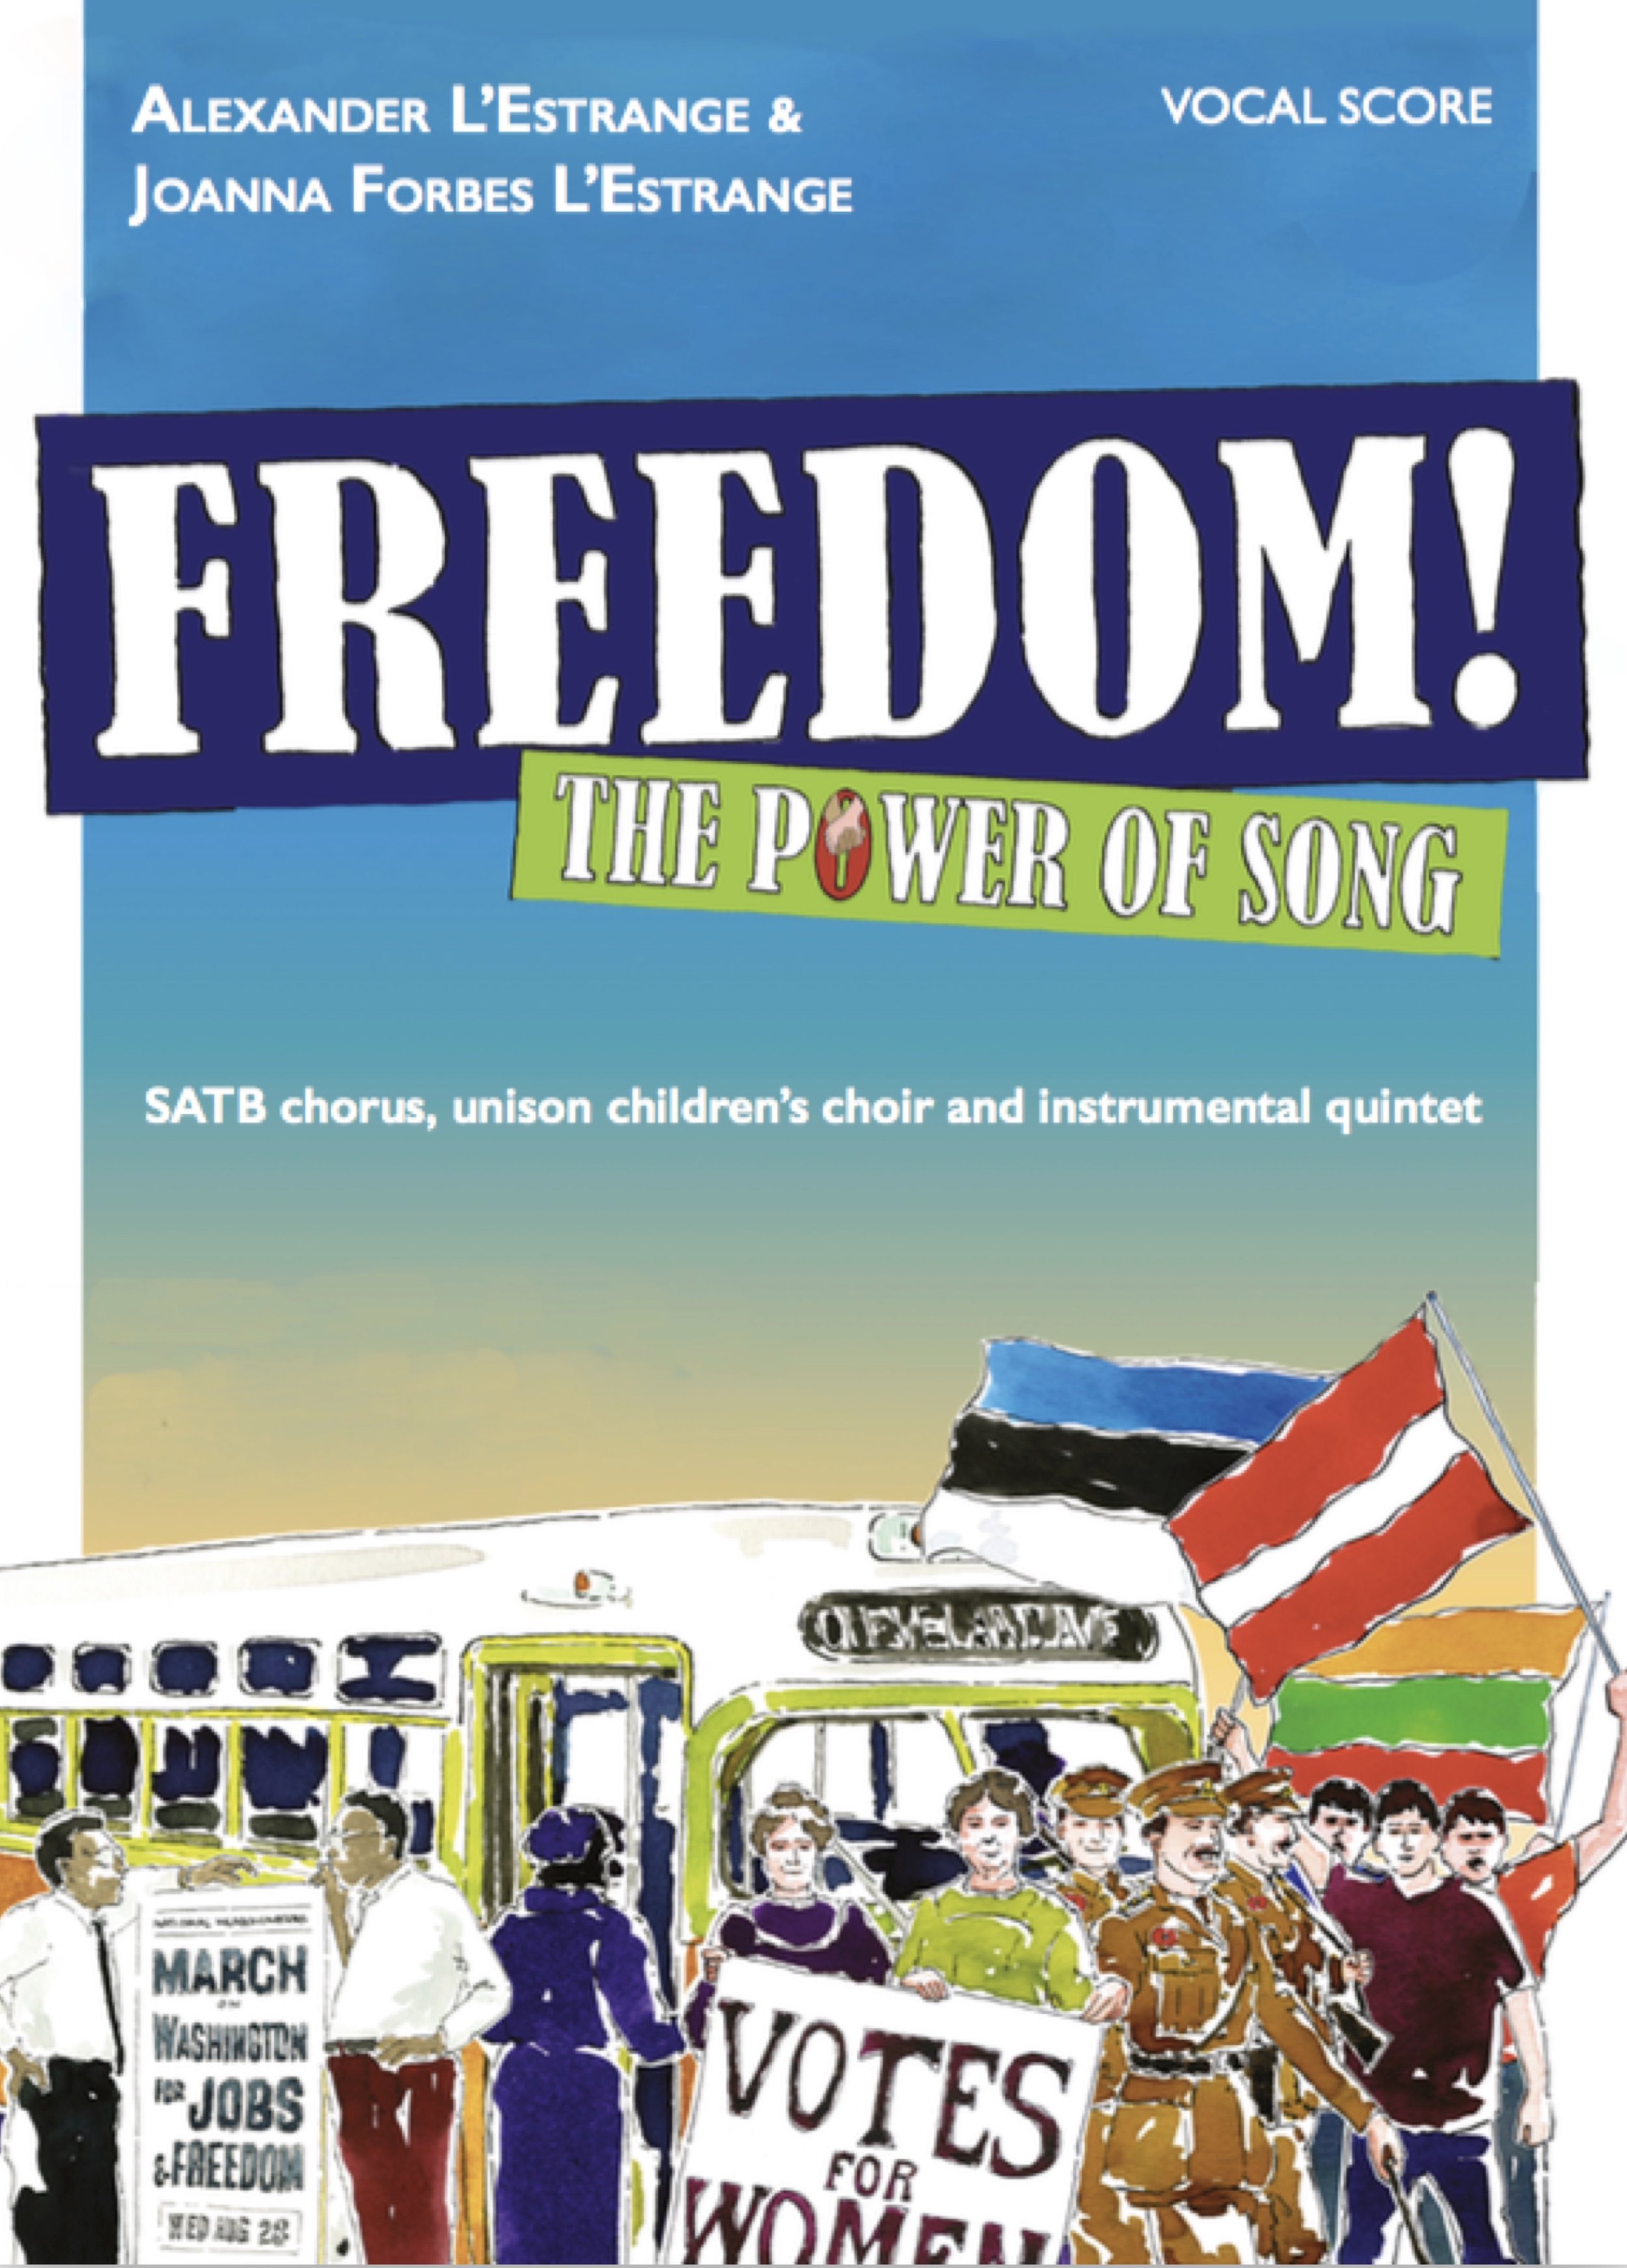 FREEDOM! The Power of Song